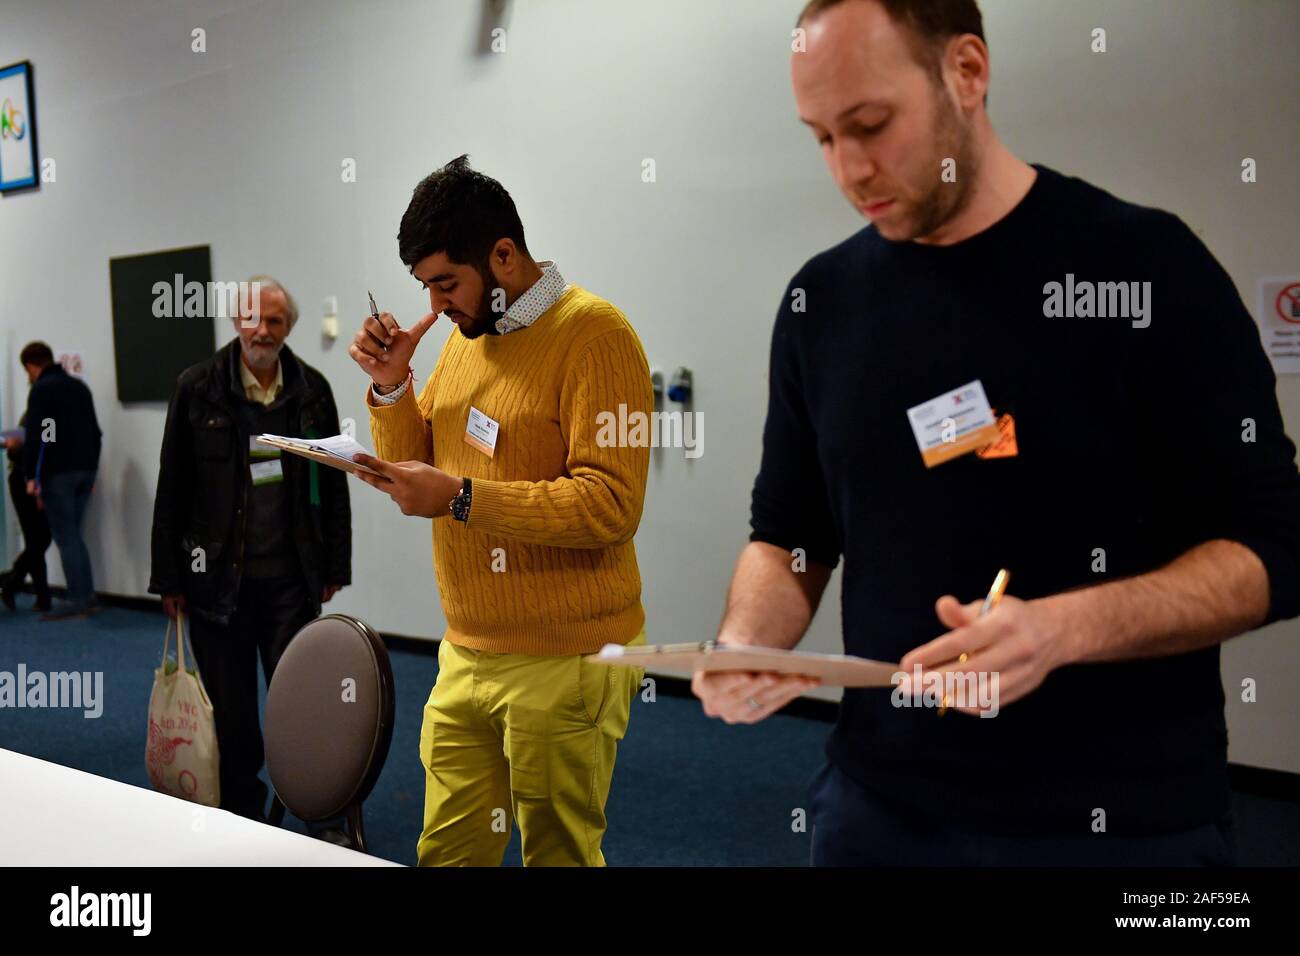 A count agent overlooks the counting for the Chipping Barnet, Finchley and Golders Green, and Hendon constituencies, at Allainz Park, London. Luciana Berger is contesting the Finchley and Golders Green constituency for the Liberal Democrats. Stock Photo